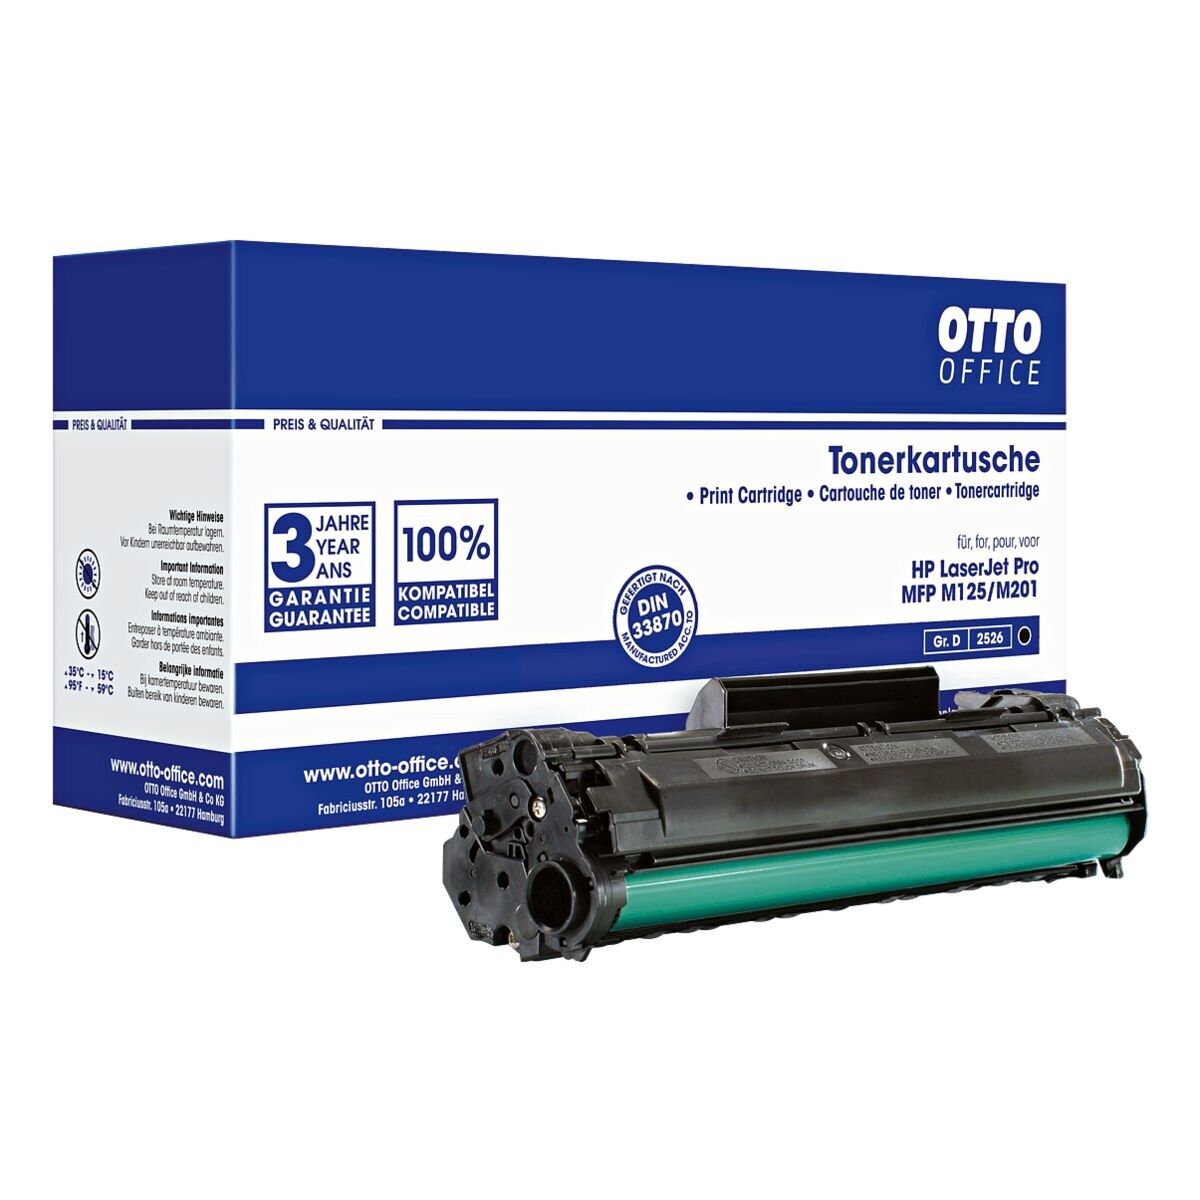 OTTO Office Toner quivalent Hewlett Packards  CF283A  Nr. 83A